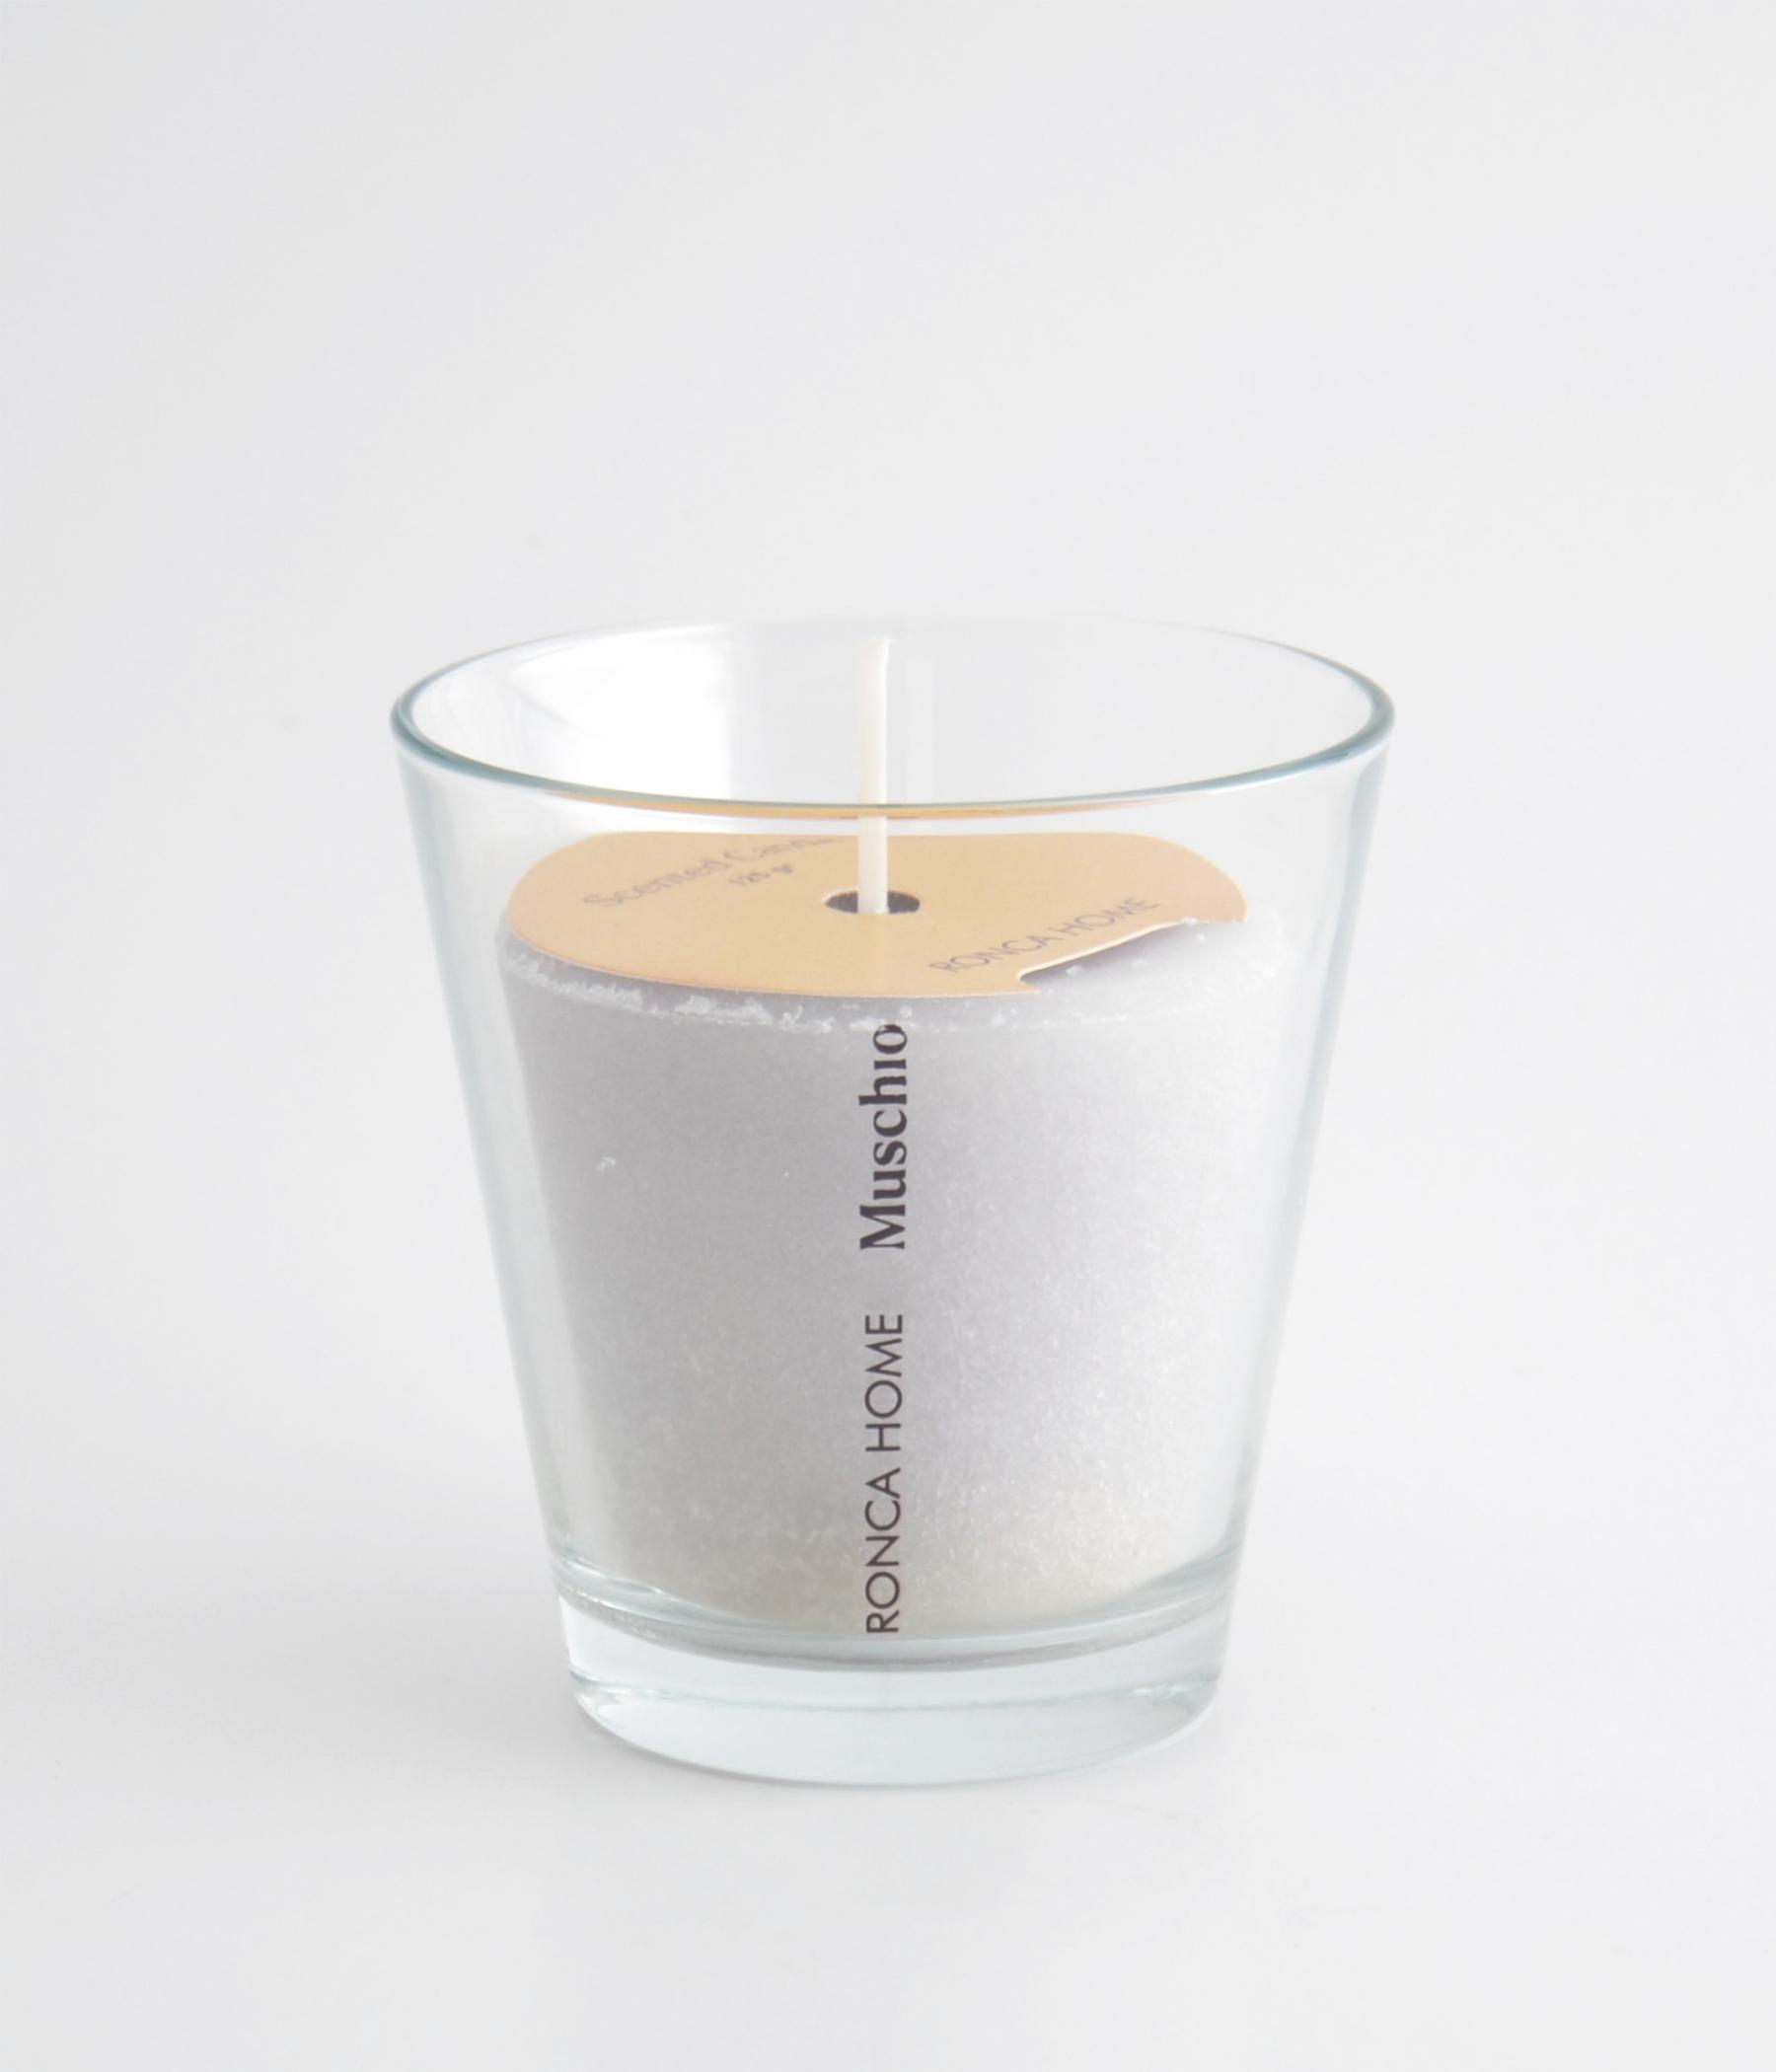 Conycal glass candle / Musk - Ronca Home